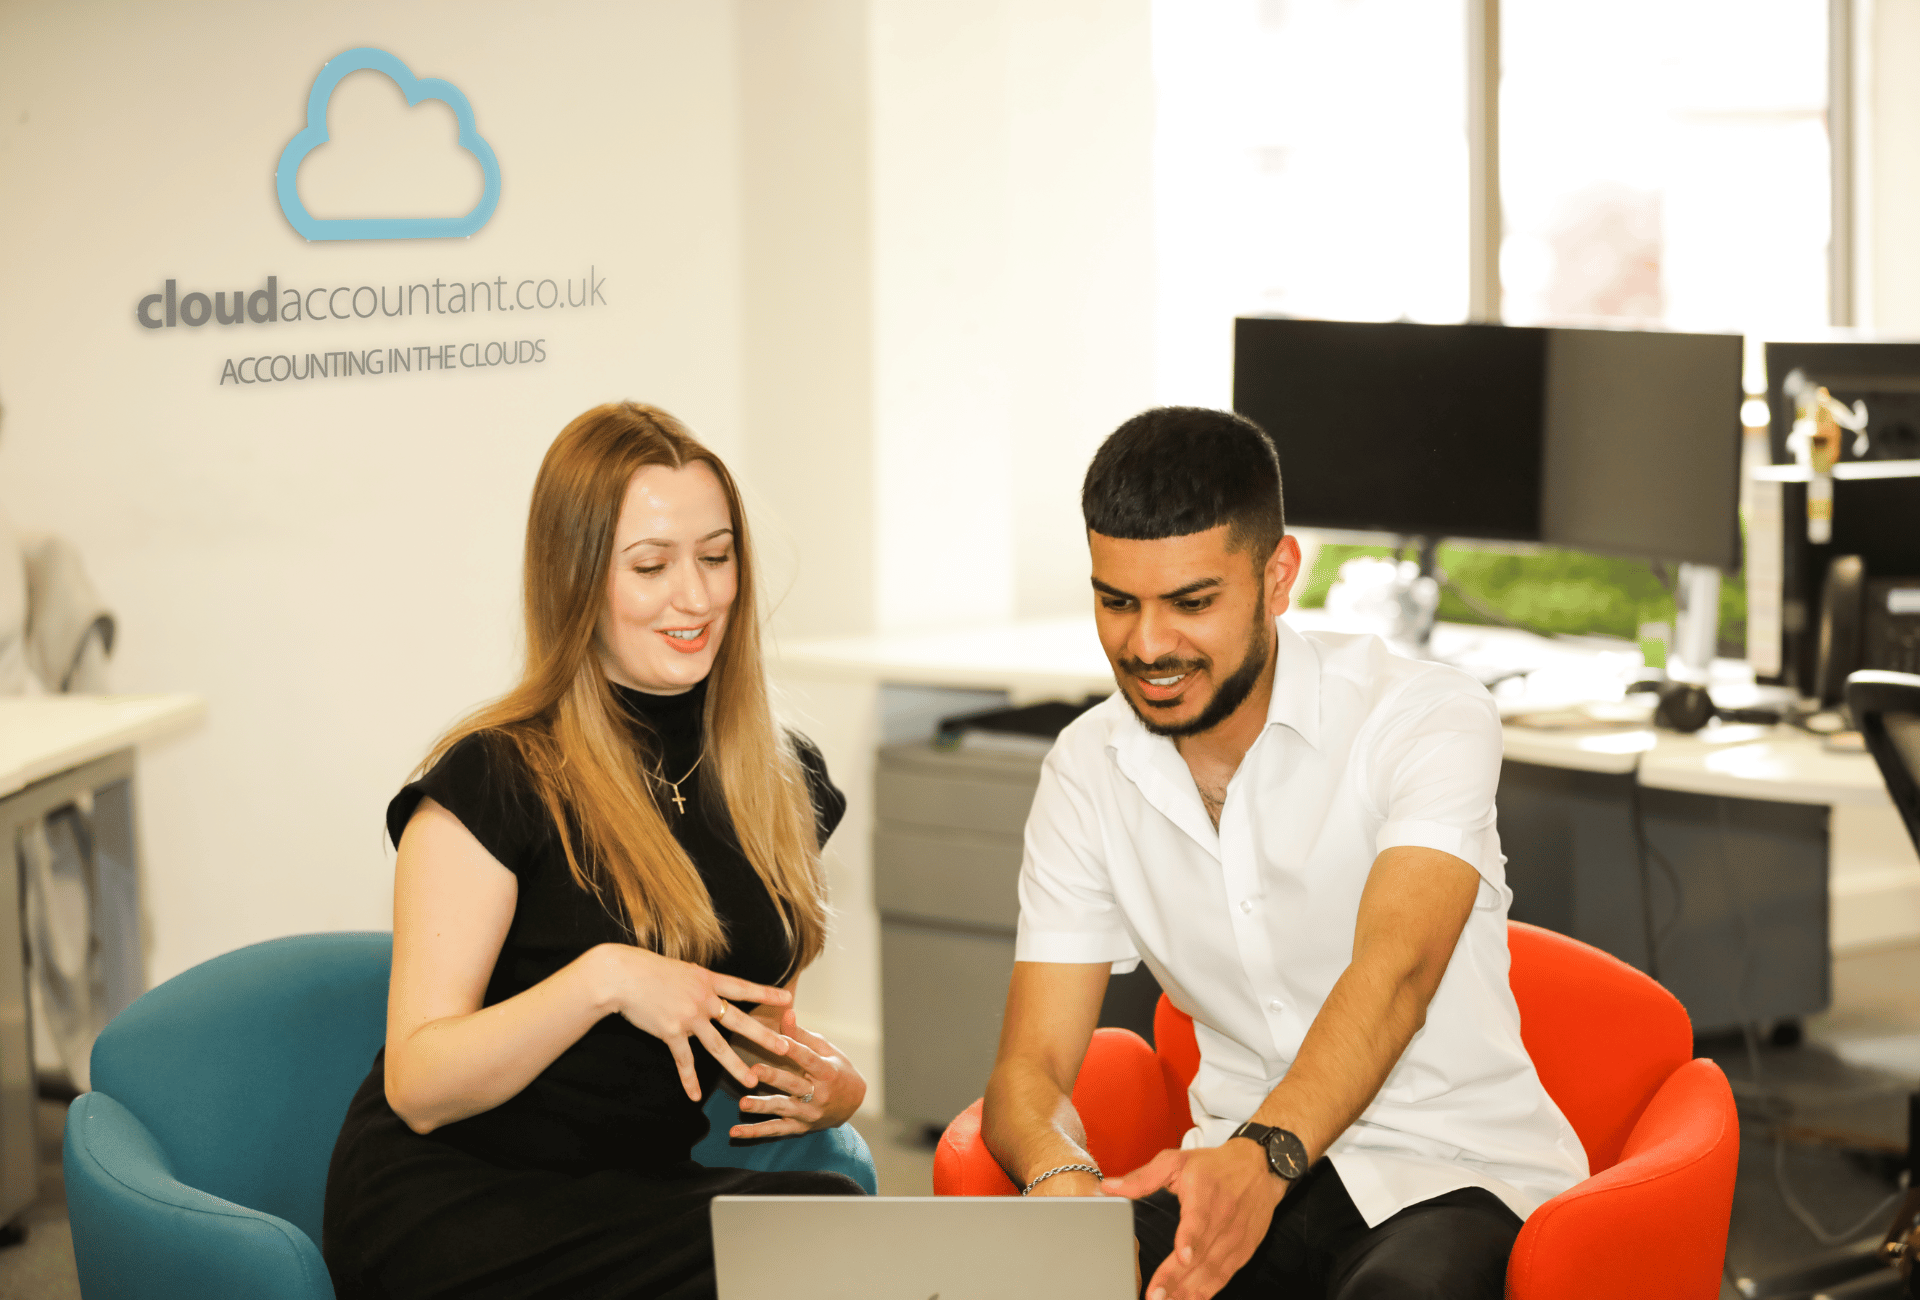 Accountants Rebecca and Sheraz hold a meeting together in the CloudAccountant.co.uk offices. They are looking at something on a laptop.